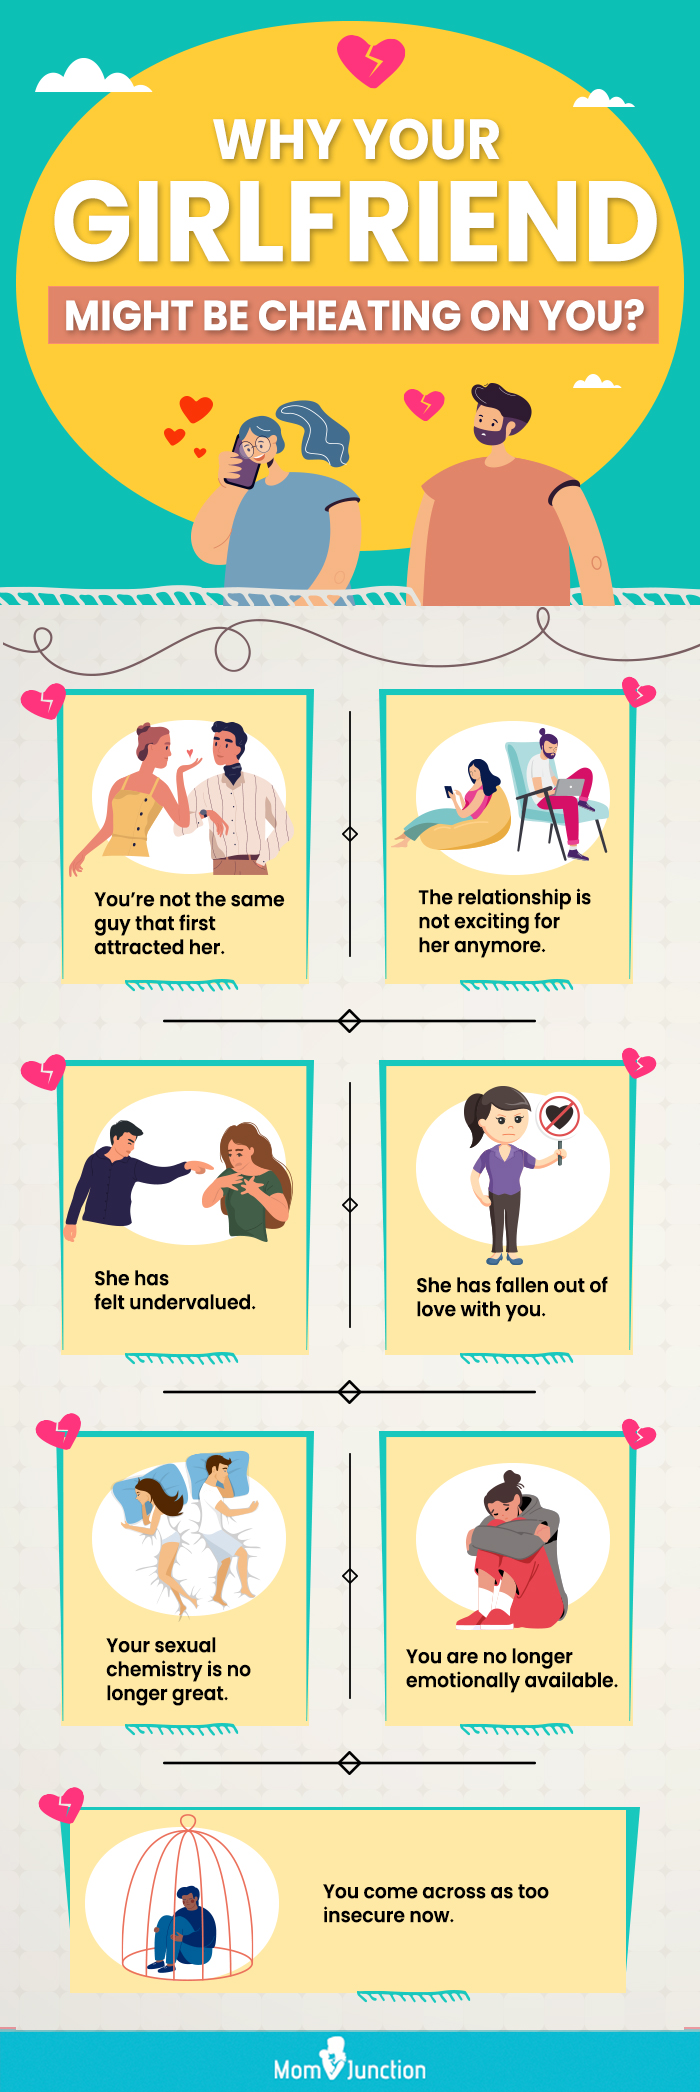 why your girlfriend might be cheating on you-2 (infographic)